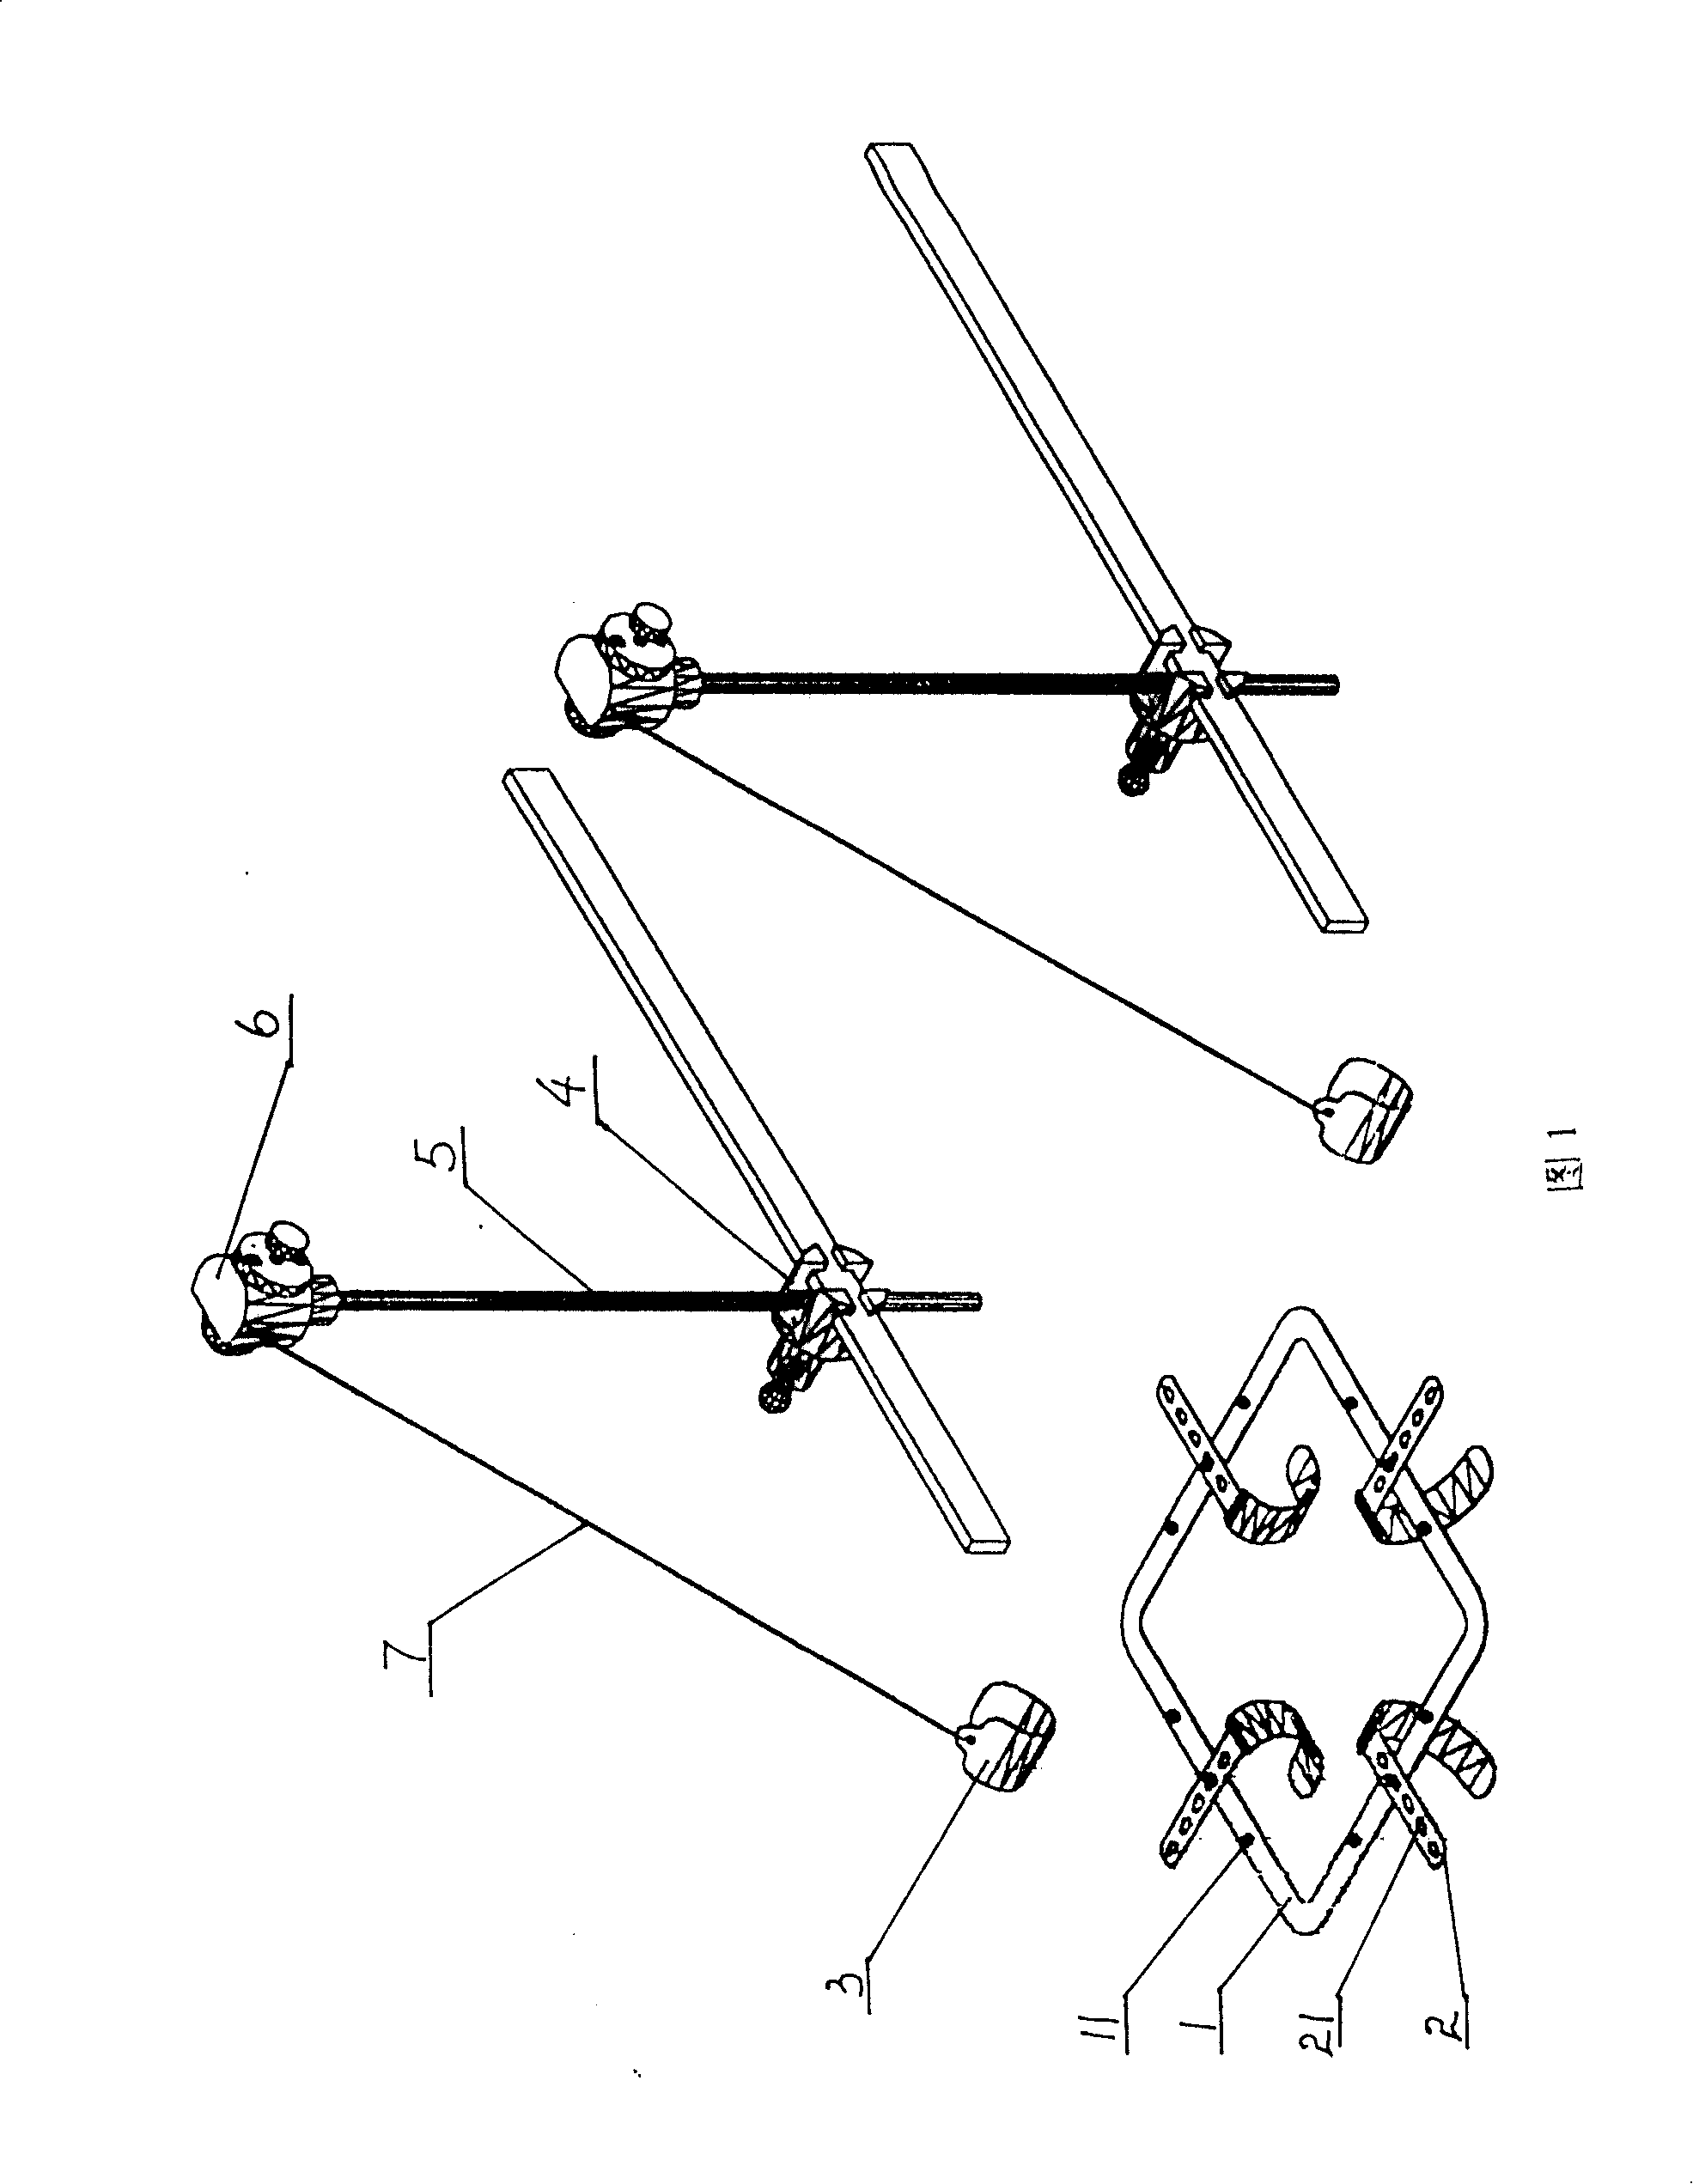 Stereo retractor for abdominal operation incision